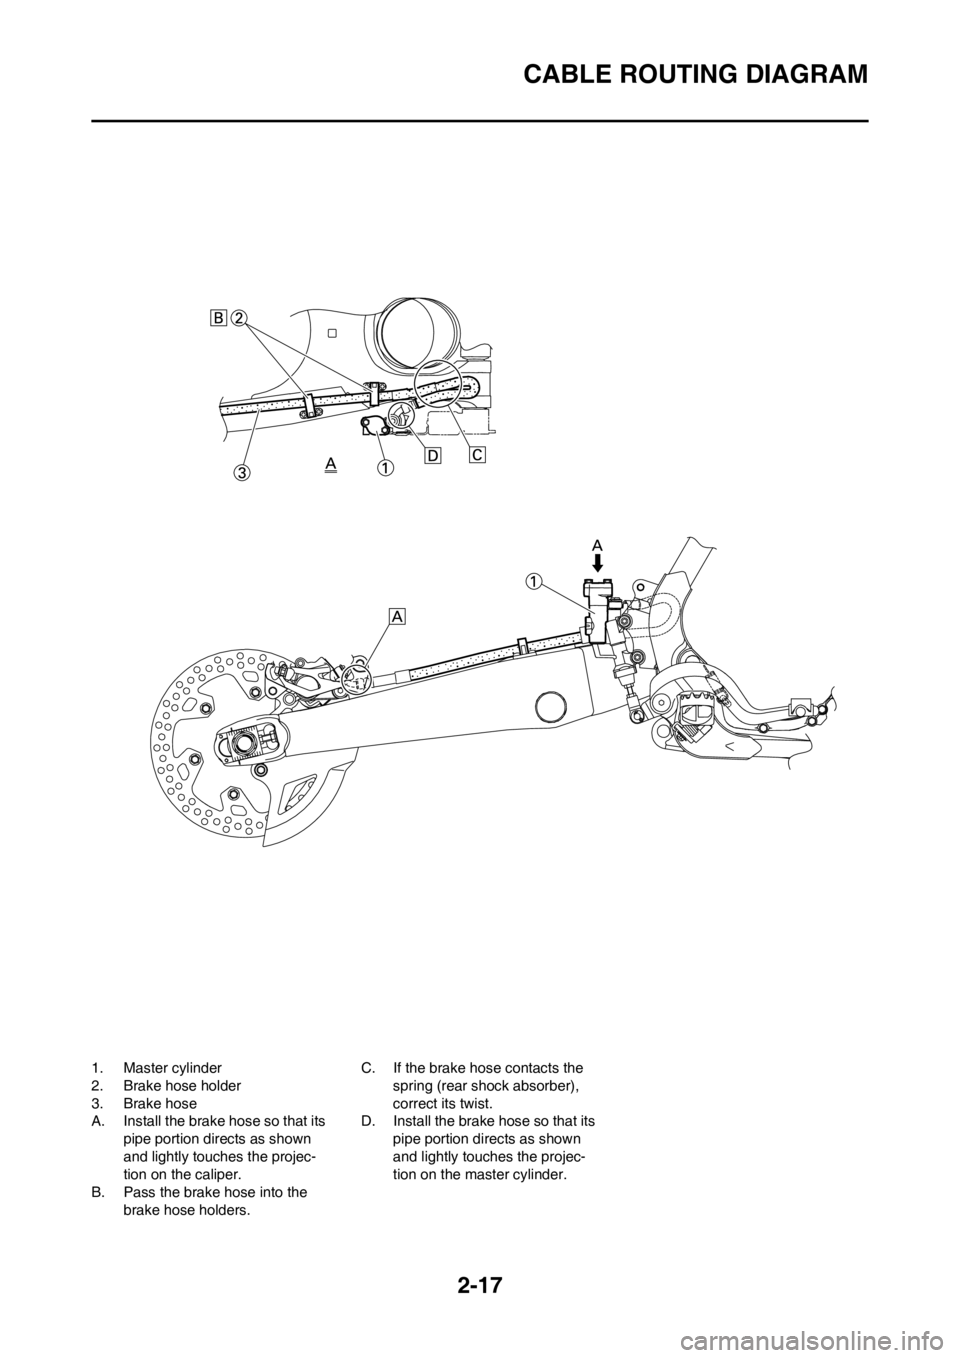 YAMAHA YZ125LC 2012  Owners Manual 2-17
CABLE ROUTING DIAGRAM
1. Master cylinder
2. Brake hose holder
3. Brake hose
A. Install the brake hose so that its 
pipe portion directs as shown 
and lightly touches the projec-
tion on the calip